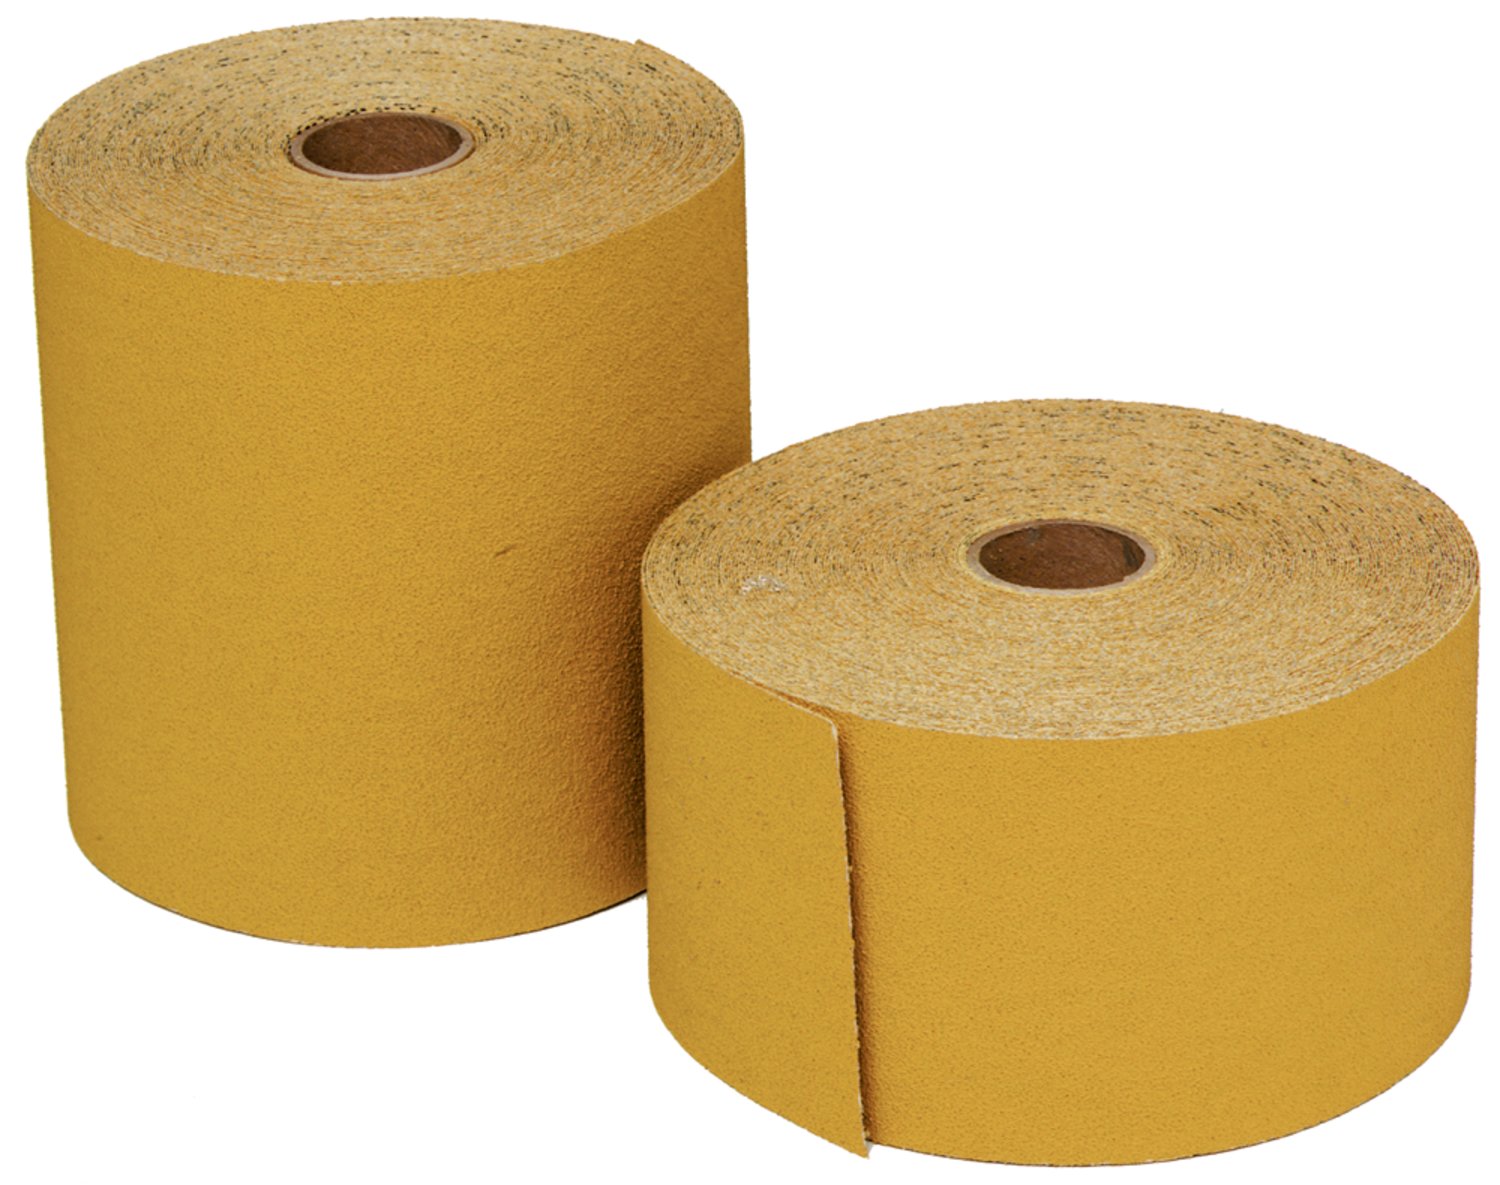 7100111145 - 3M Stikit Gold Paper Roll 216U, P400 A-weight, Config